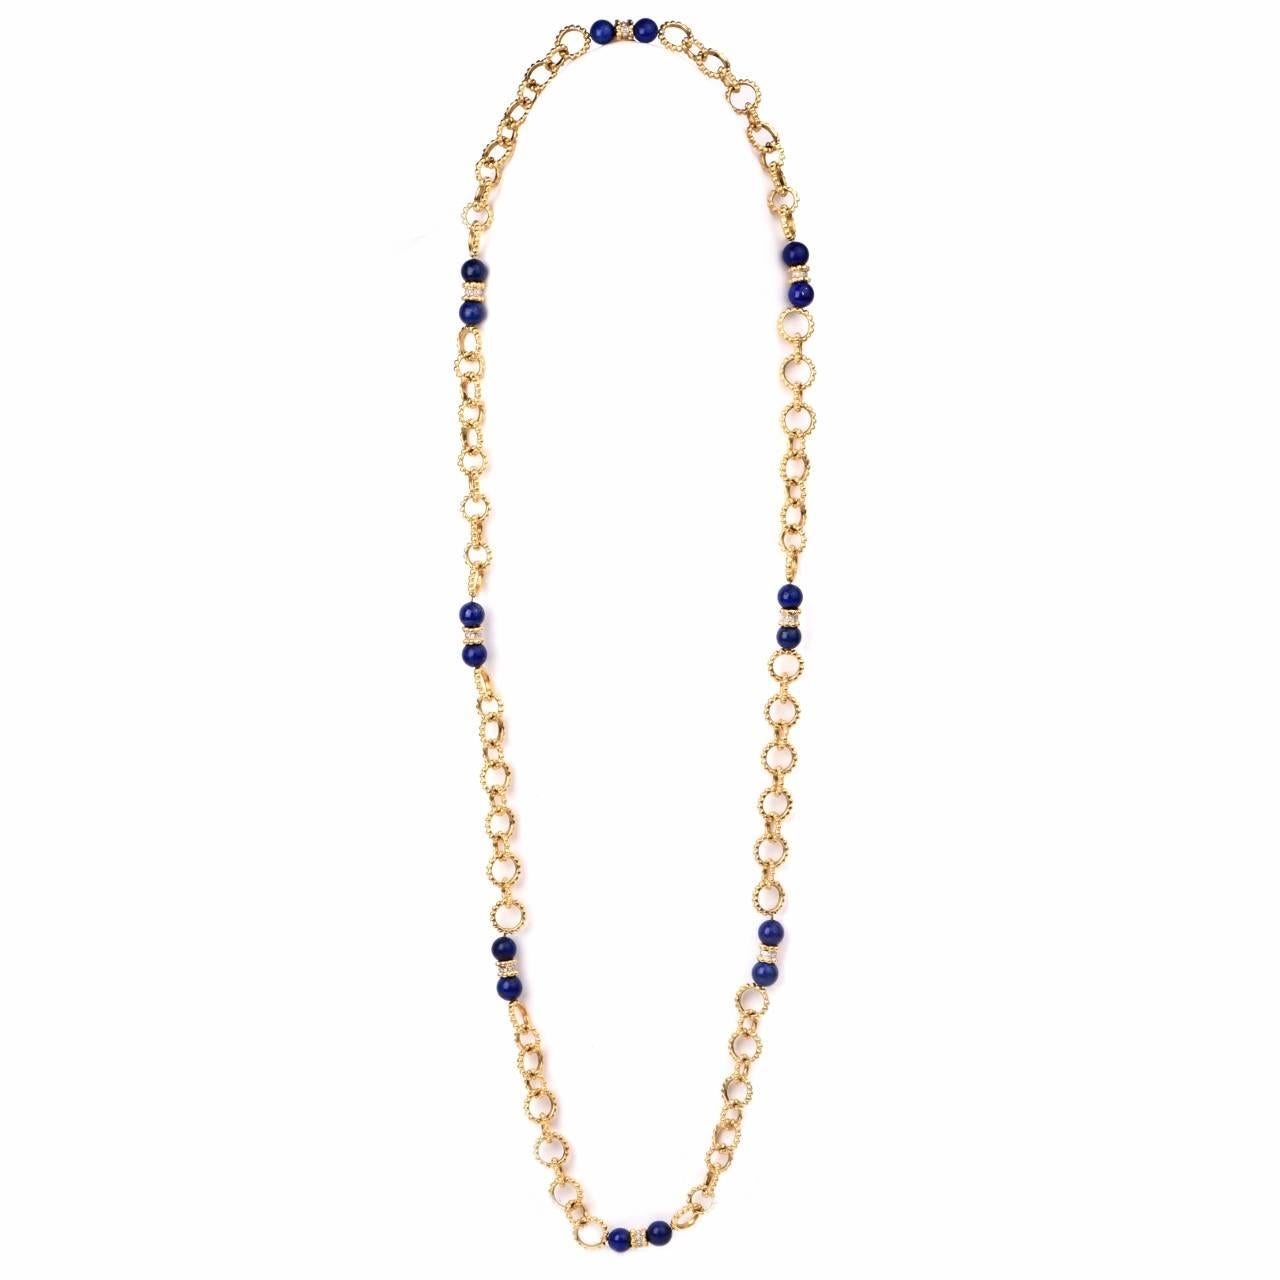 This fashionable estate chain necklace of alluring aesthetic and classic elegance is crafted in 18K yellow gold, weighing approx. 116.1 grams and measuring 32